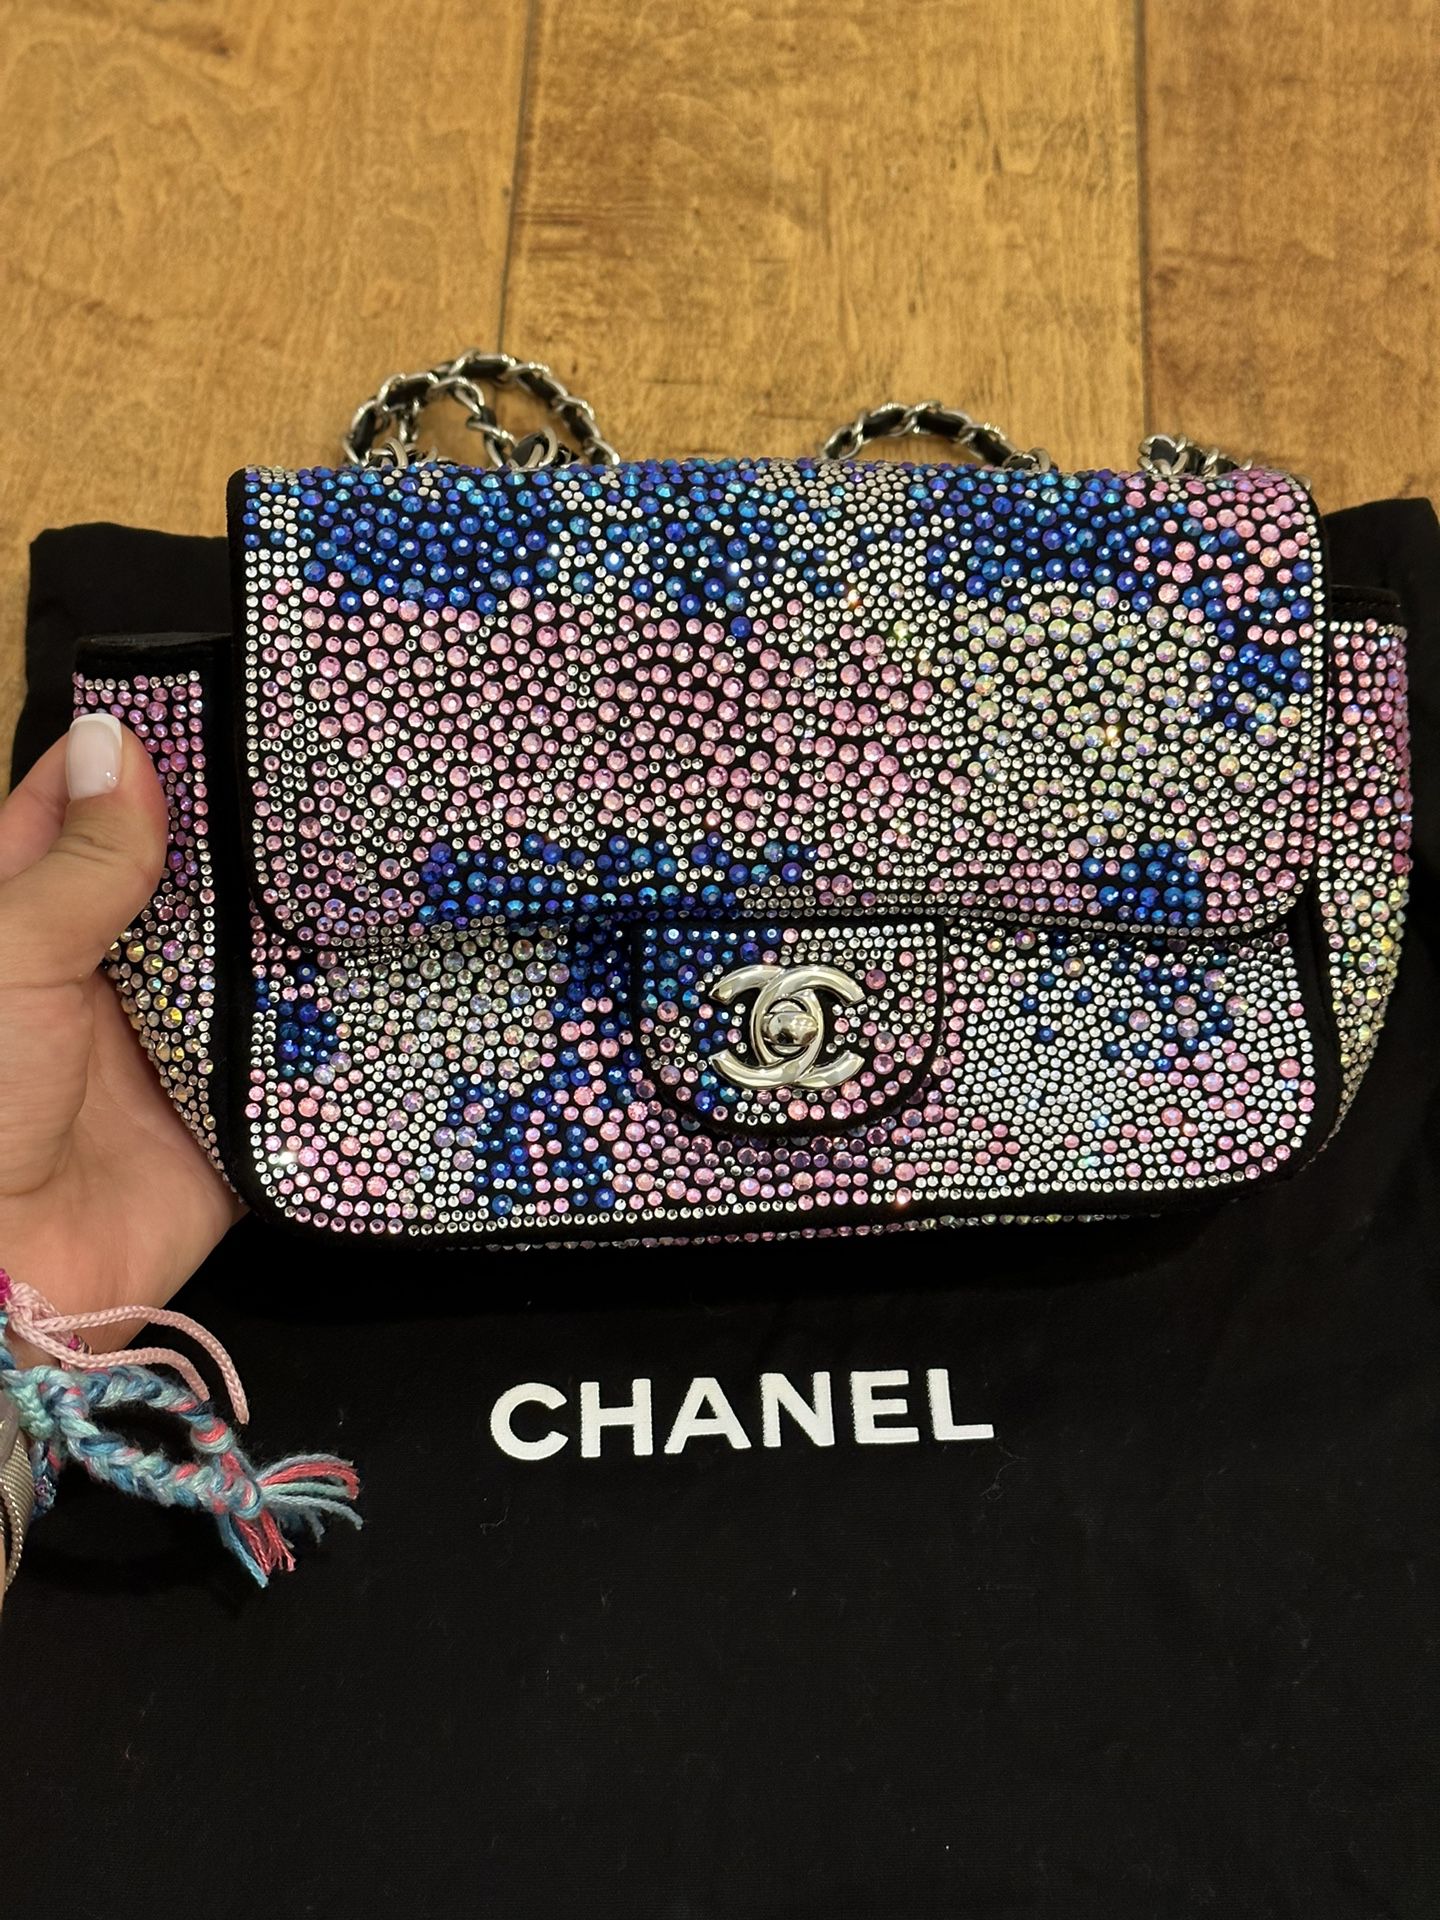 Chanel Crystal Bag Luxe Copy